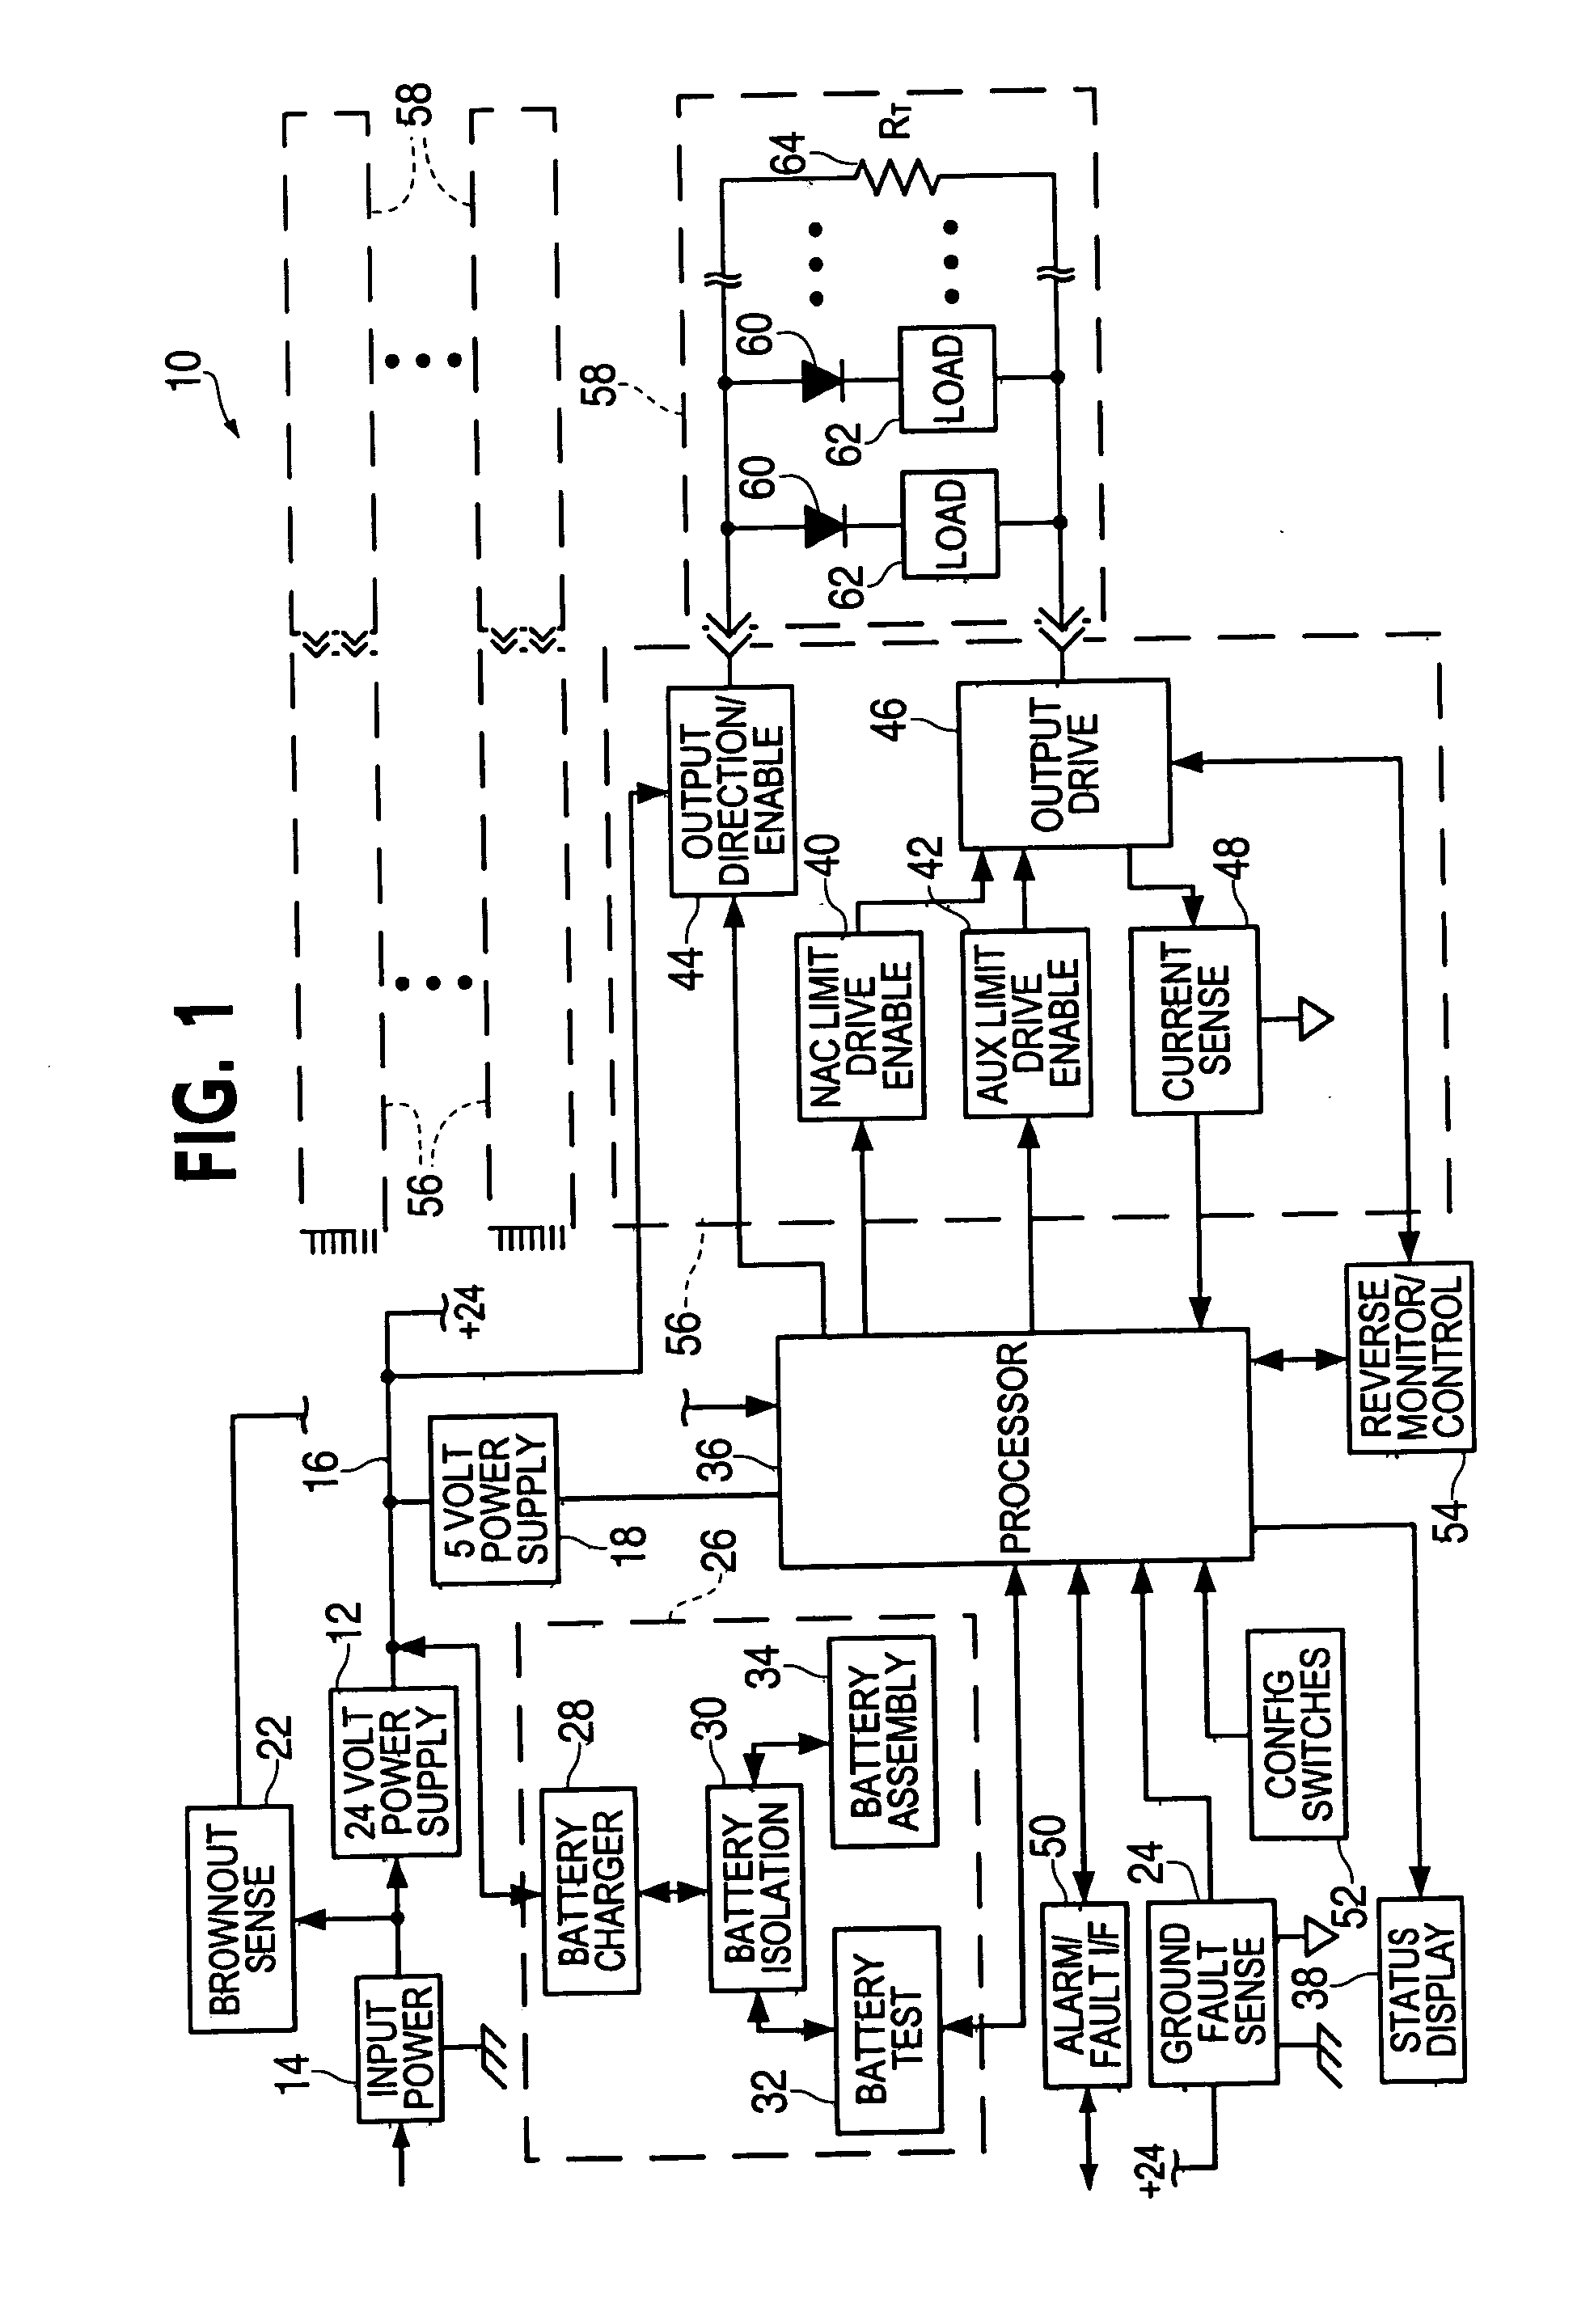 Fire alarm notification power supply with configurable notification appliance circuits and auxiliary power circuits apparatus and method